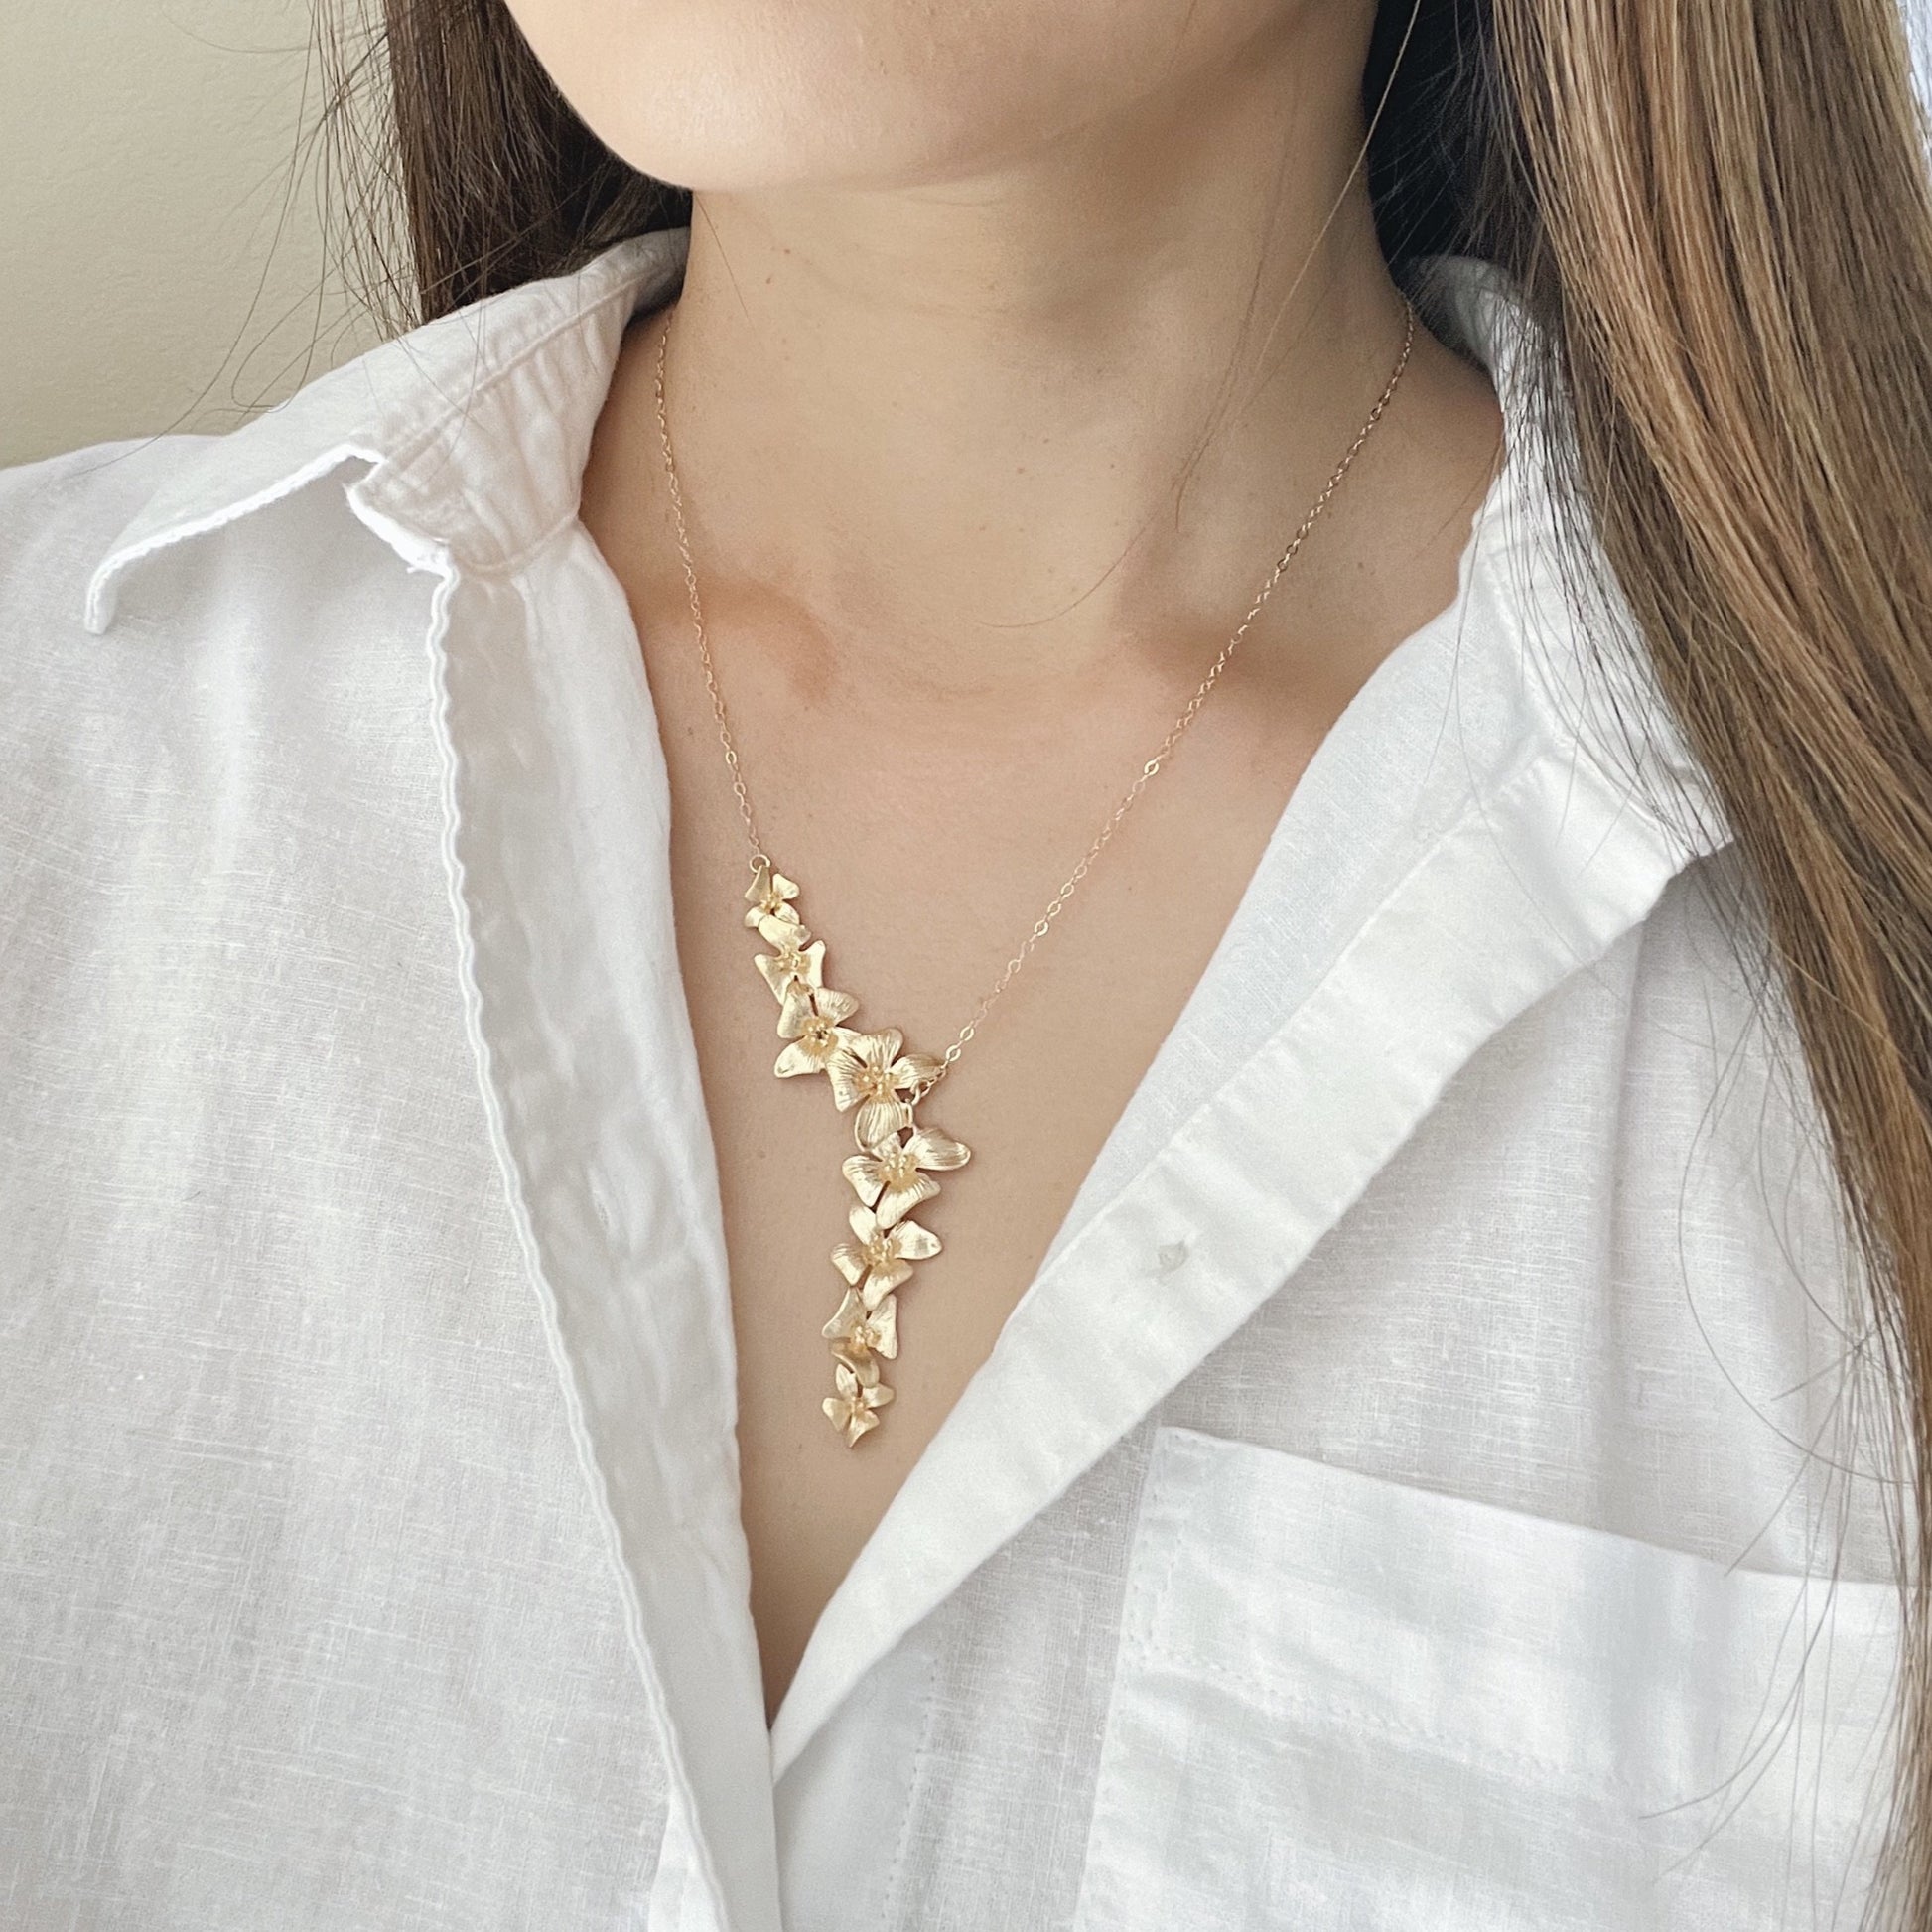 Woman wearing gold y flower necklace